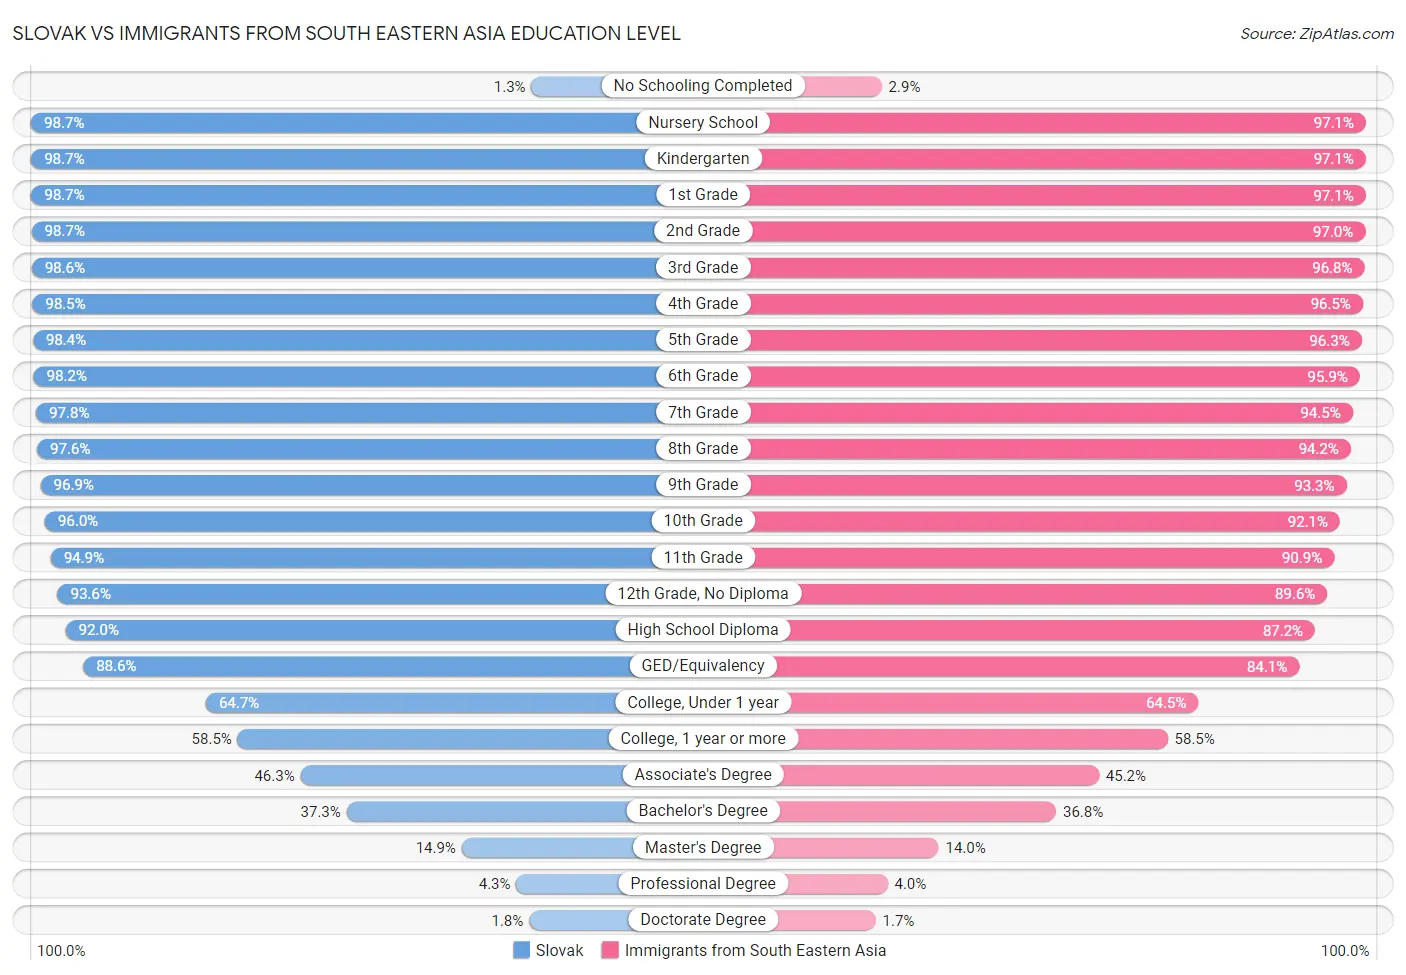 Slovak vs Immigrants from South Eastern Asia Education Level